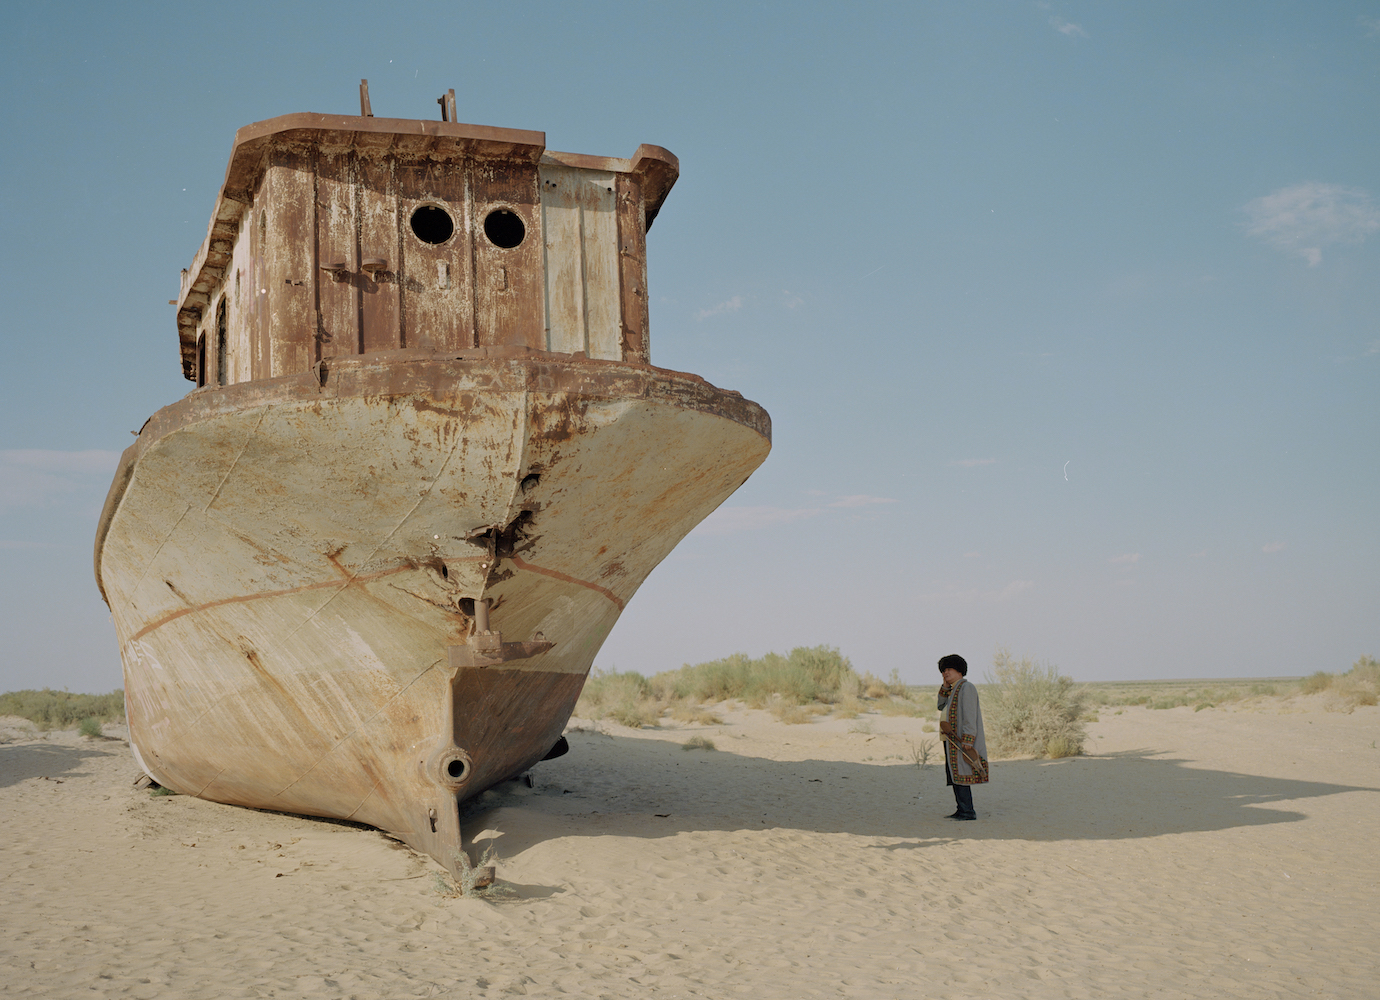 Waiting For The Sea is a documentary finding new perspectives amid the ruins of Uzbekistan’s Aral Sea